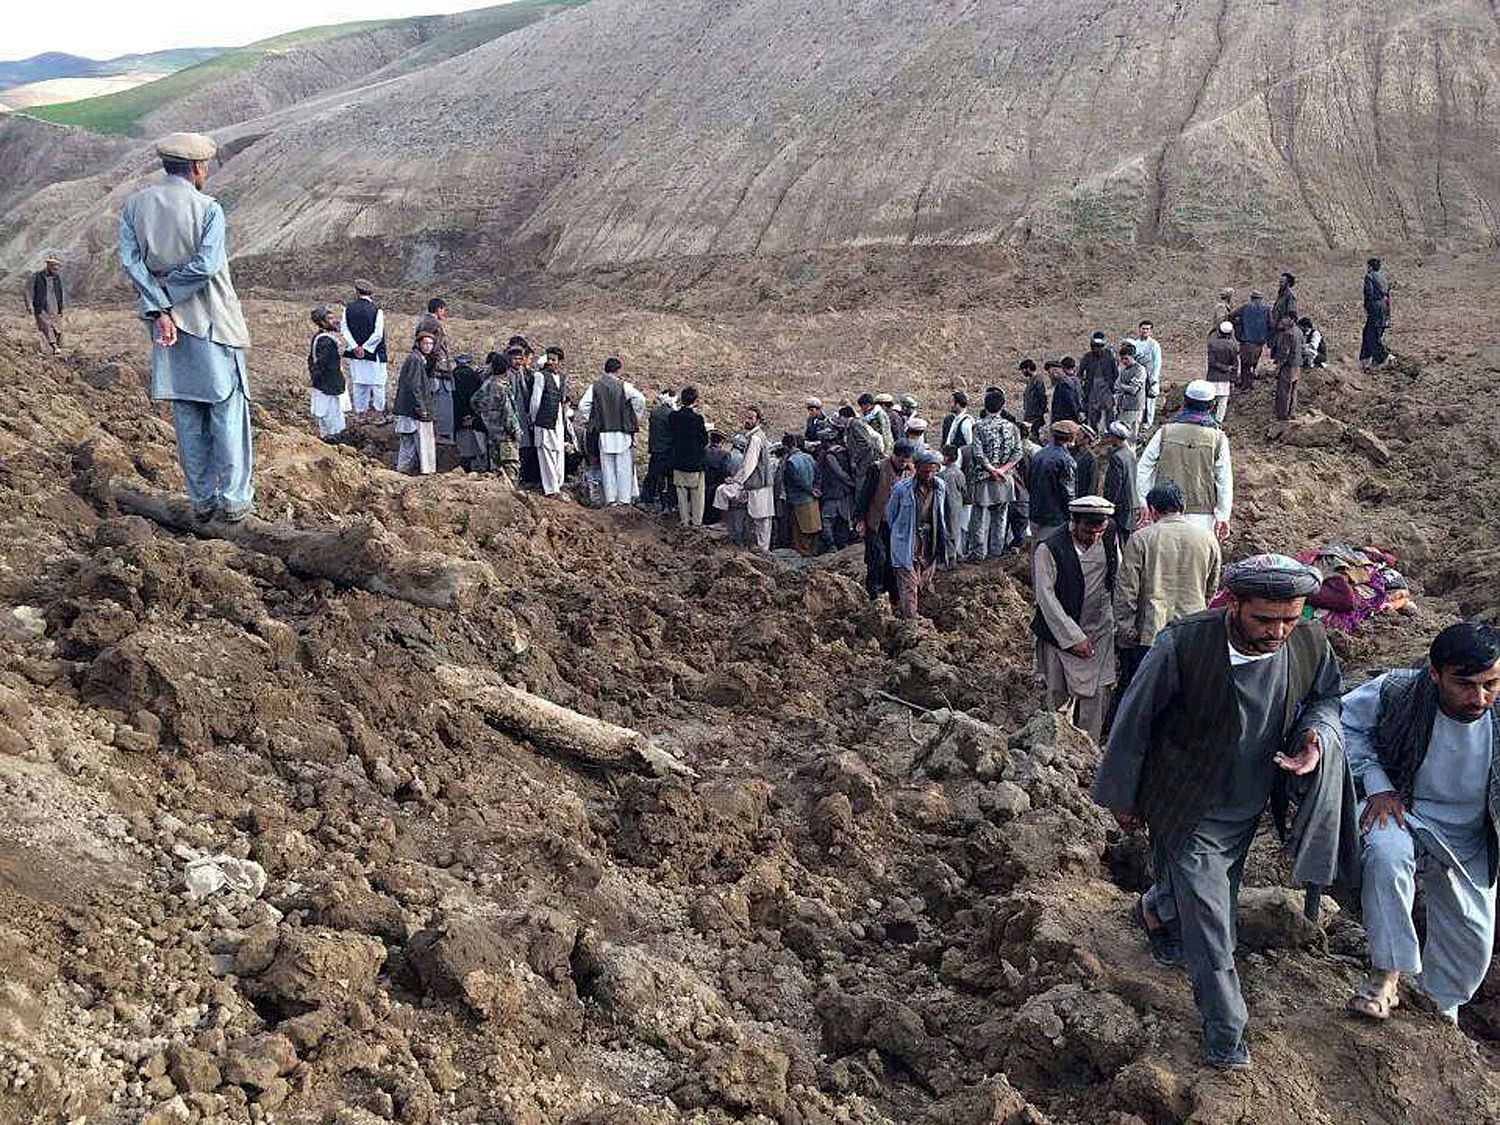 Afghan villagers gather at the site of a landslide at the Argo district in Badakhshan province, on Friday. More than 2,000 people are trapped after a landslide smashed into a village in a remote mountainous area of northeastern Afghanistan, a spokesman for the local governor said, prompting a massive search and rescue effort. Photo: Reuters